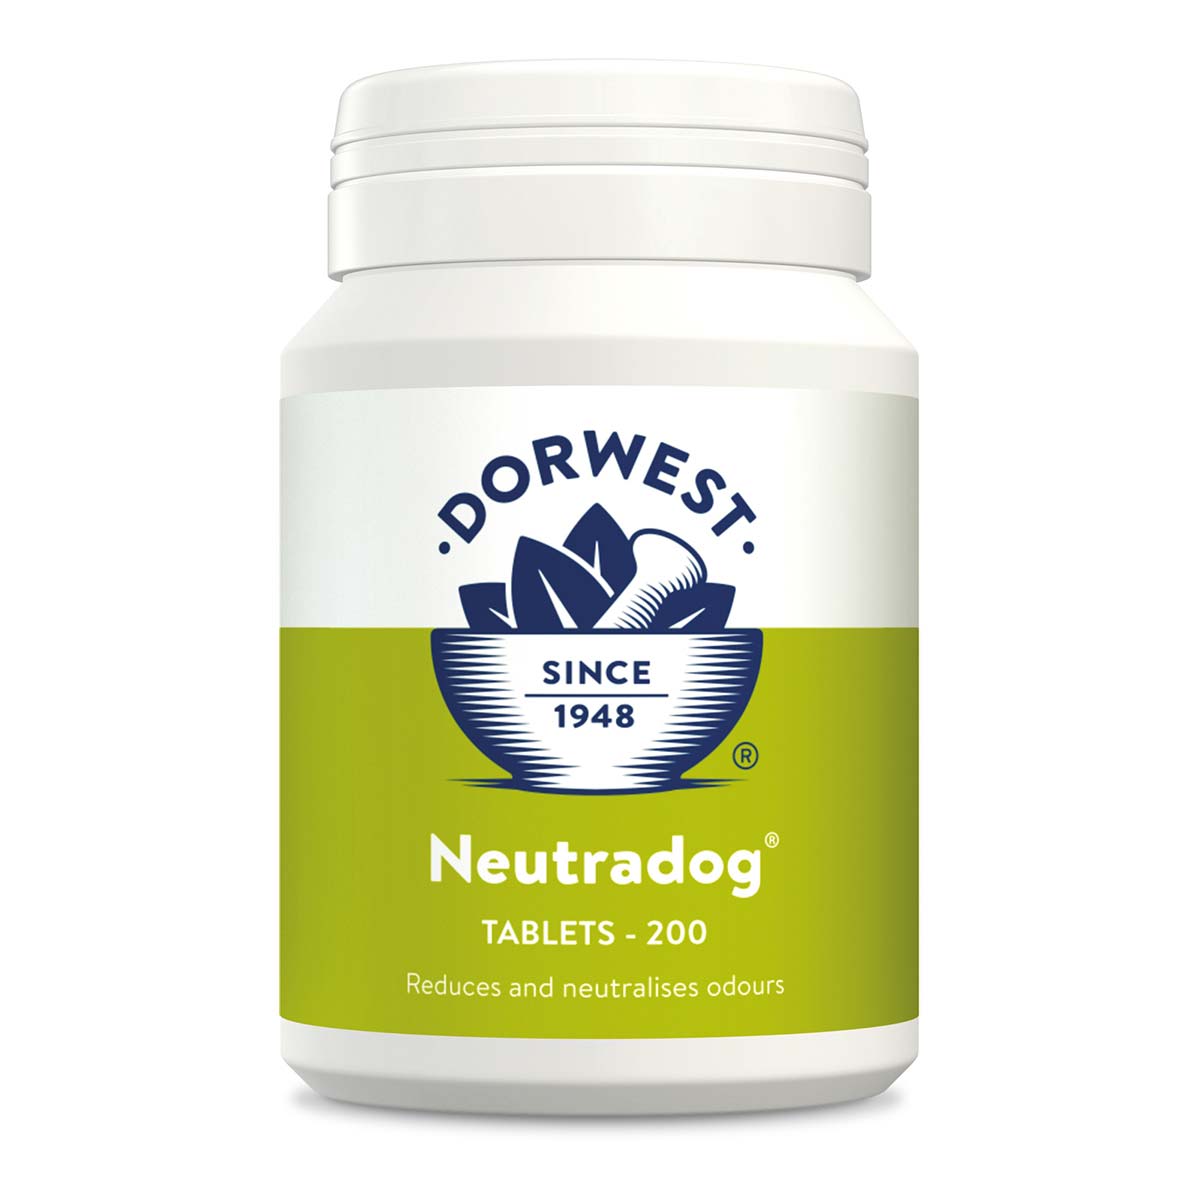 Dorwest Neutradog Tablets for Dogs and Cats